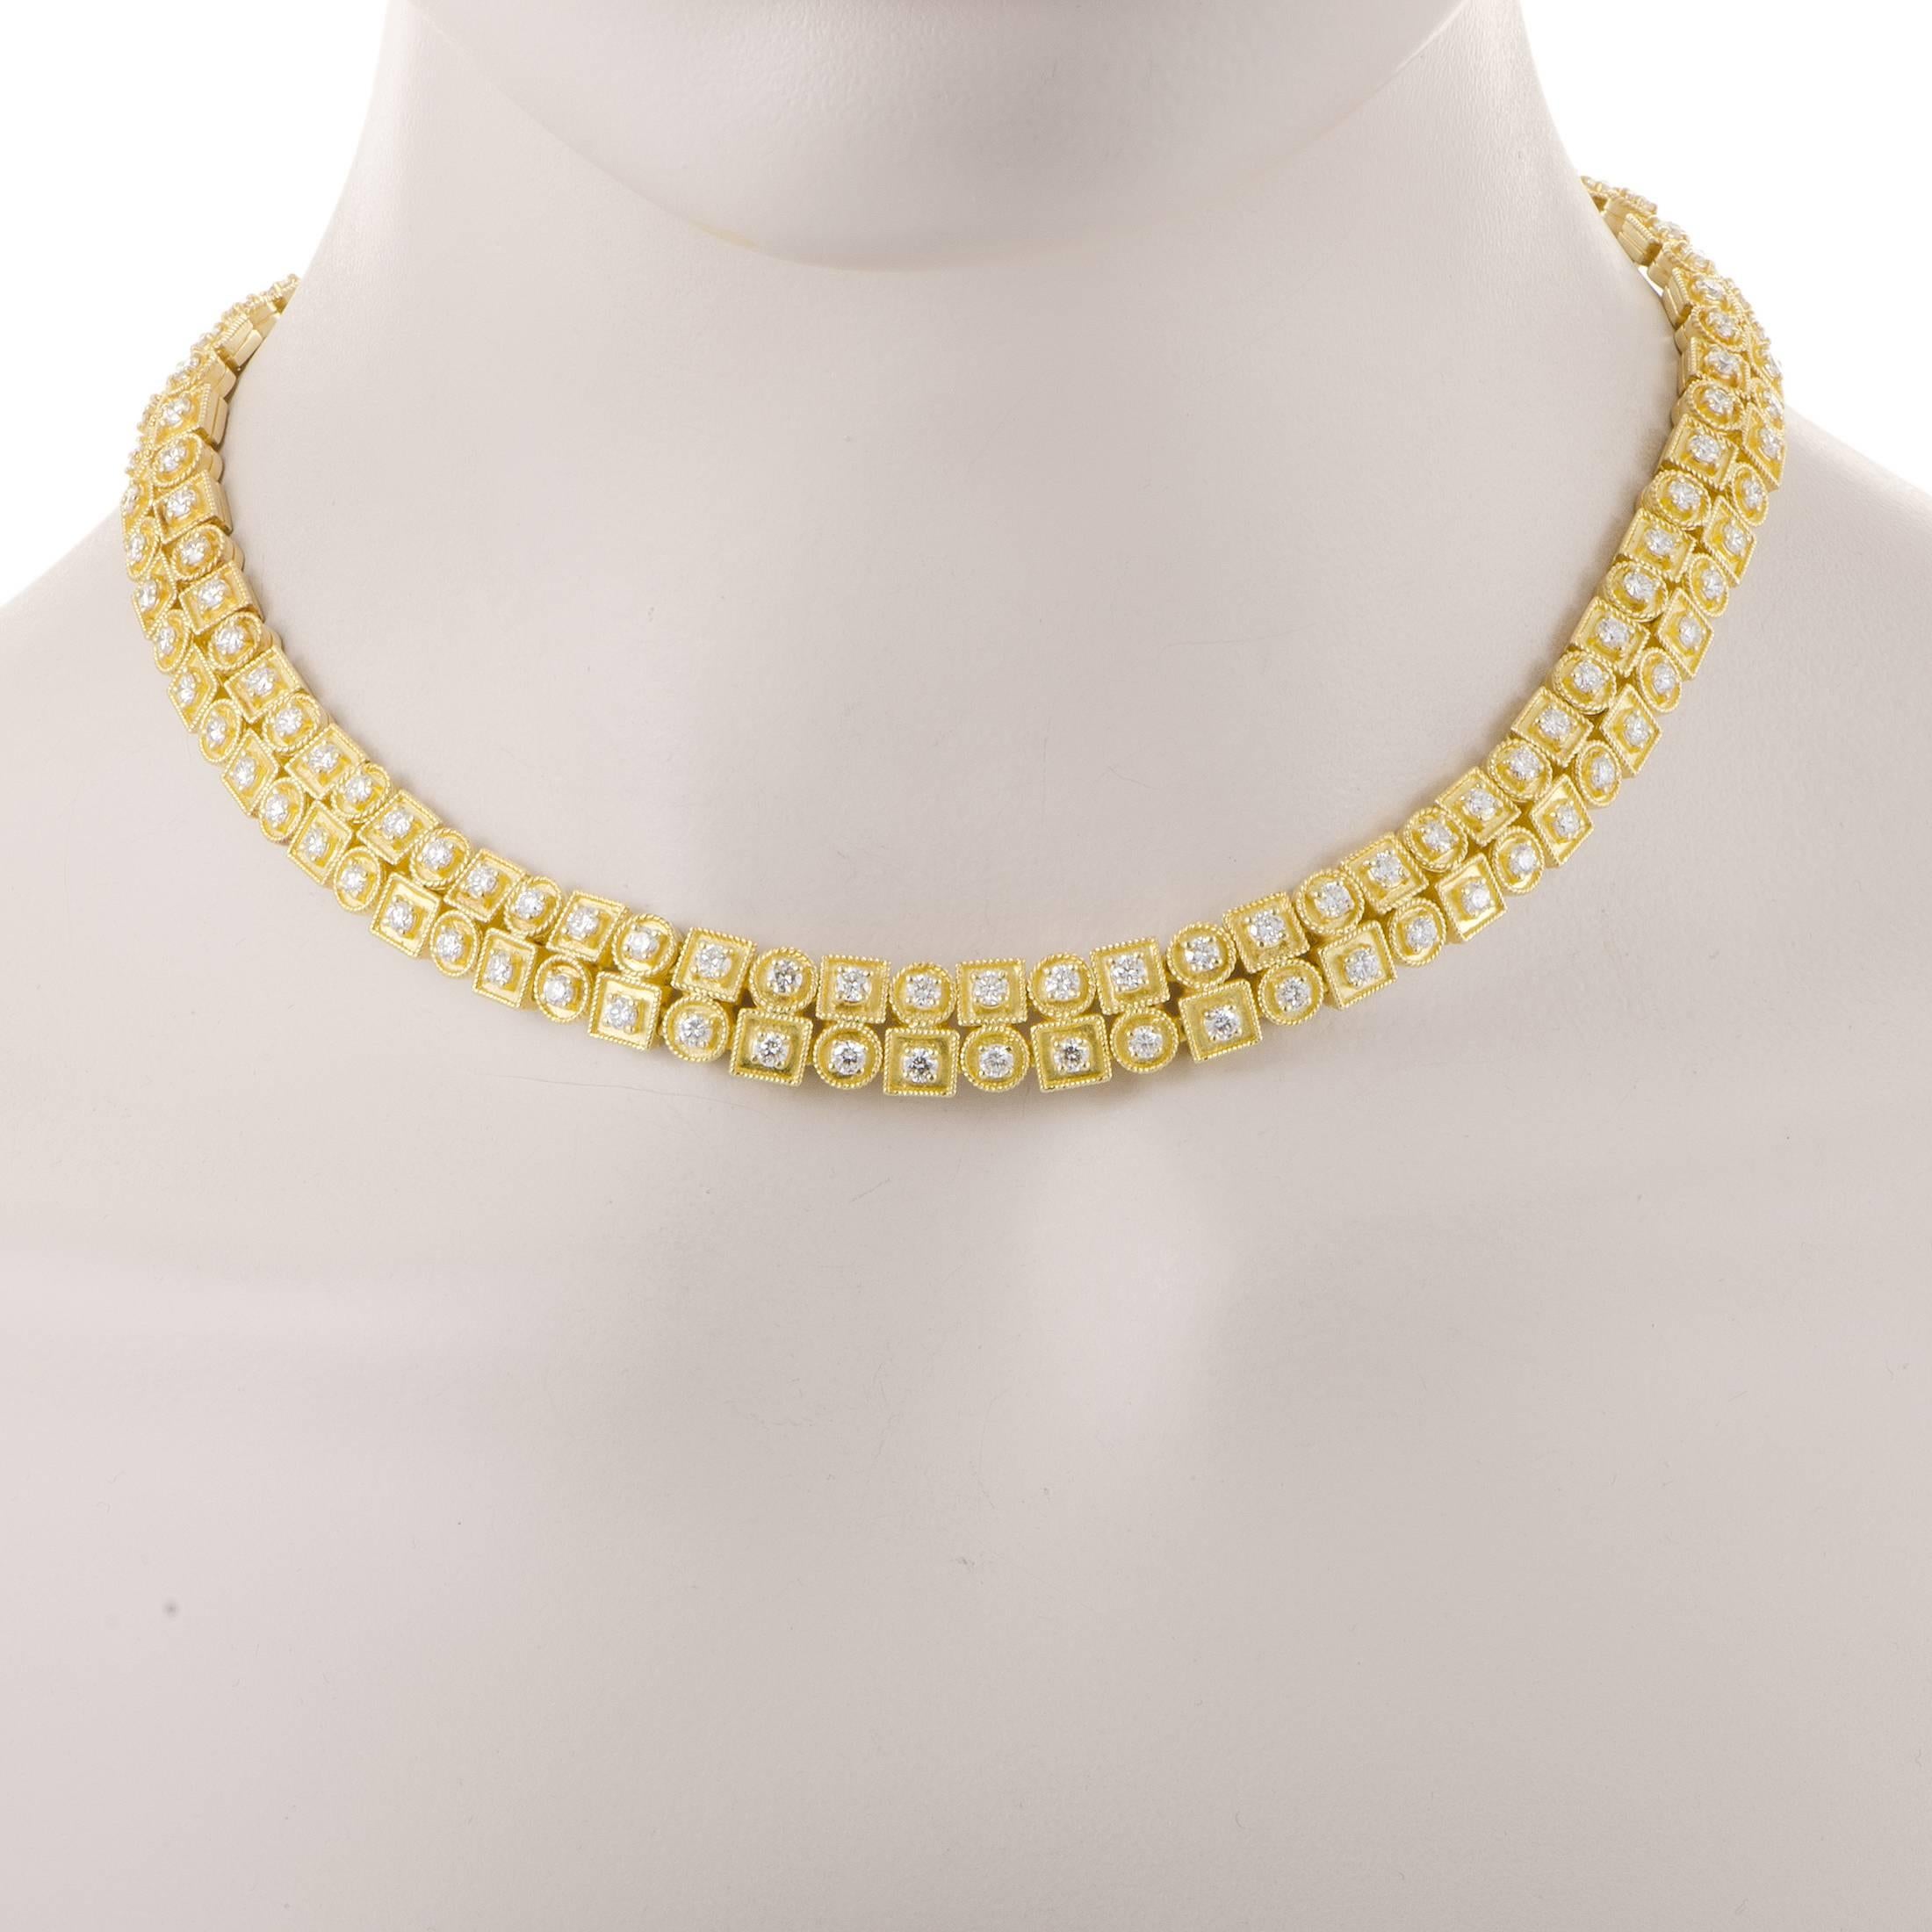 Glamorous, feminine and exceptionally tasteful, this astounding necklace from Ilias Lalaounis is expertly crafted from luxurious 18K yellow gold and neatly embellished with resplendent diamonds amounting to 9.65 carats for a dazzling sight.